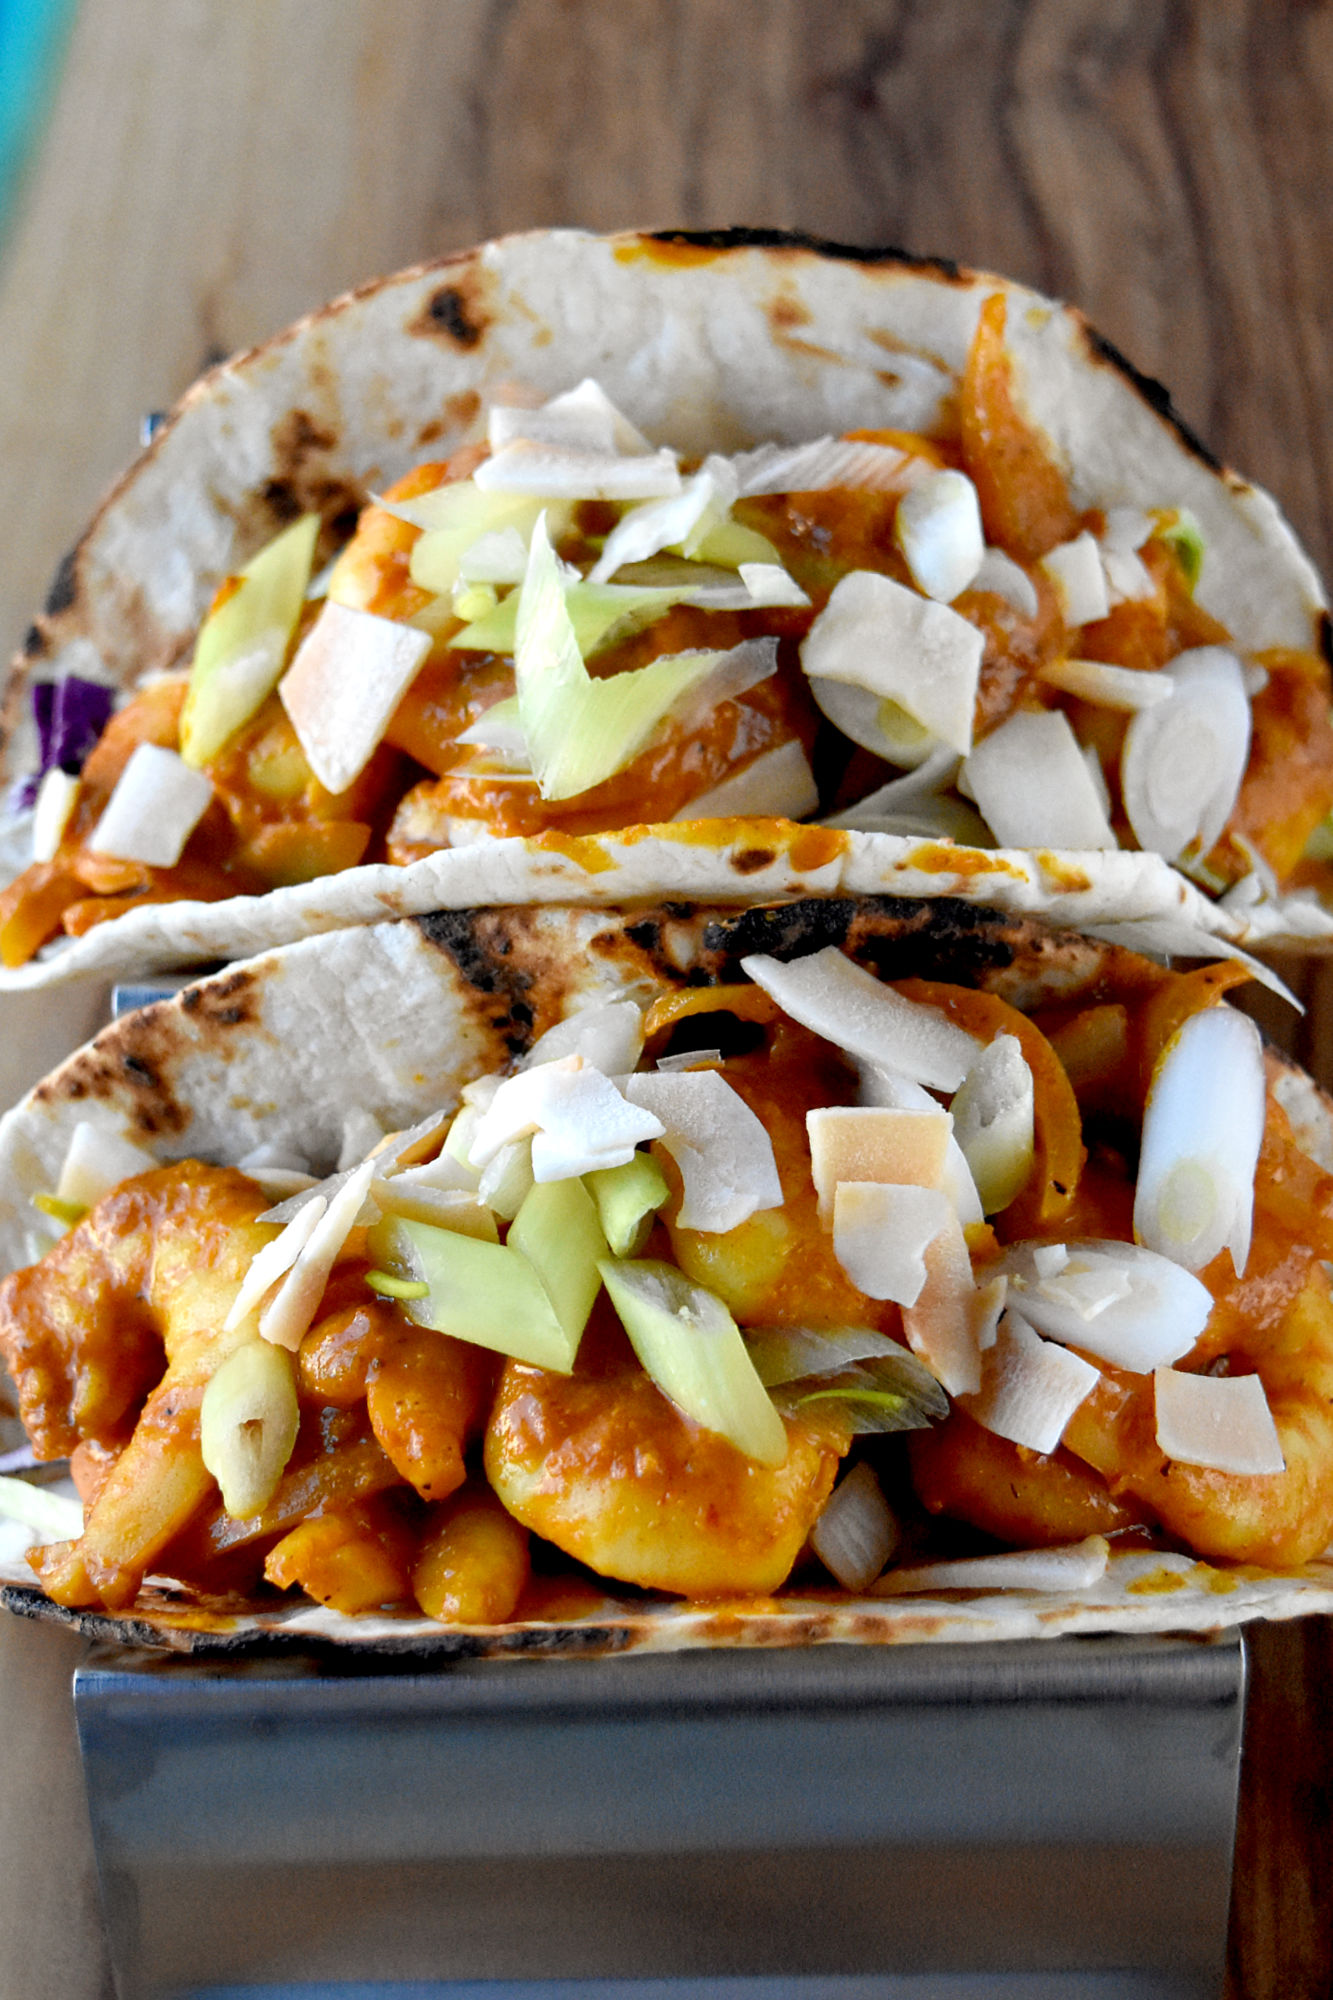 Curry Coconut Shrimp Tacos are succulent, rich, and full of curry flavor. They’re a fun twist on an Asian dish and perfect for #TacoTuesday! #OurFamilyTable #Thaicoconutcurry #coconutcurry #Thaicurry #currytacos #TacoTuesday
